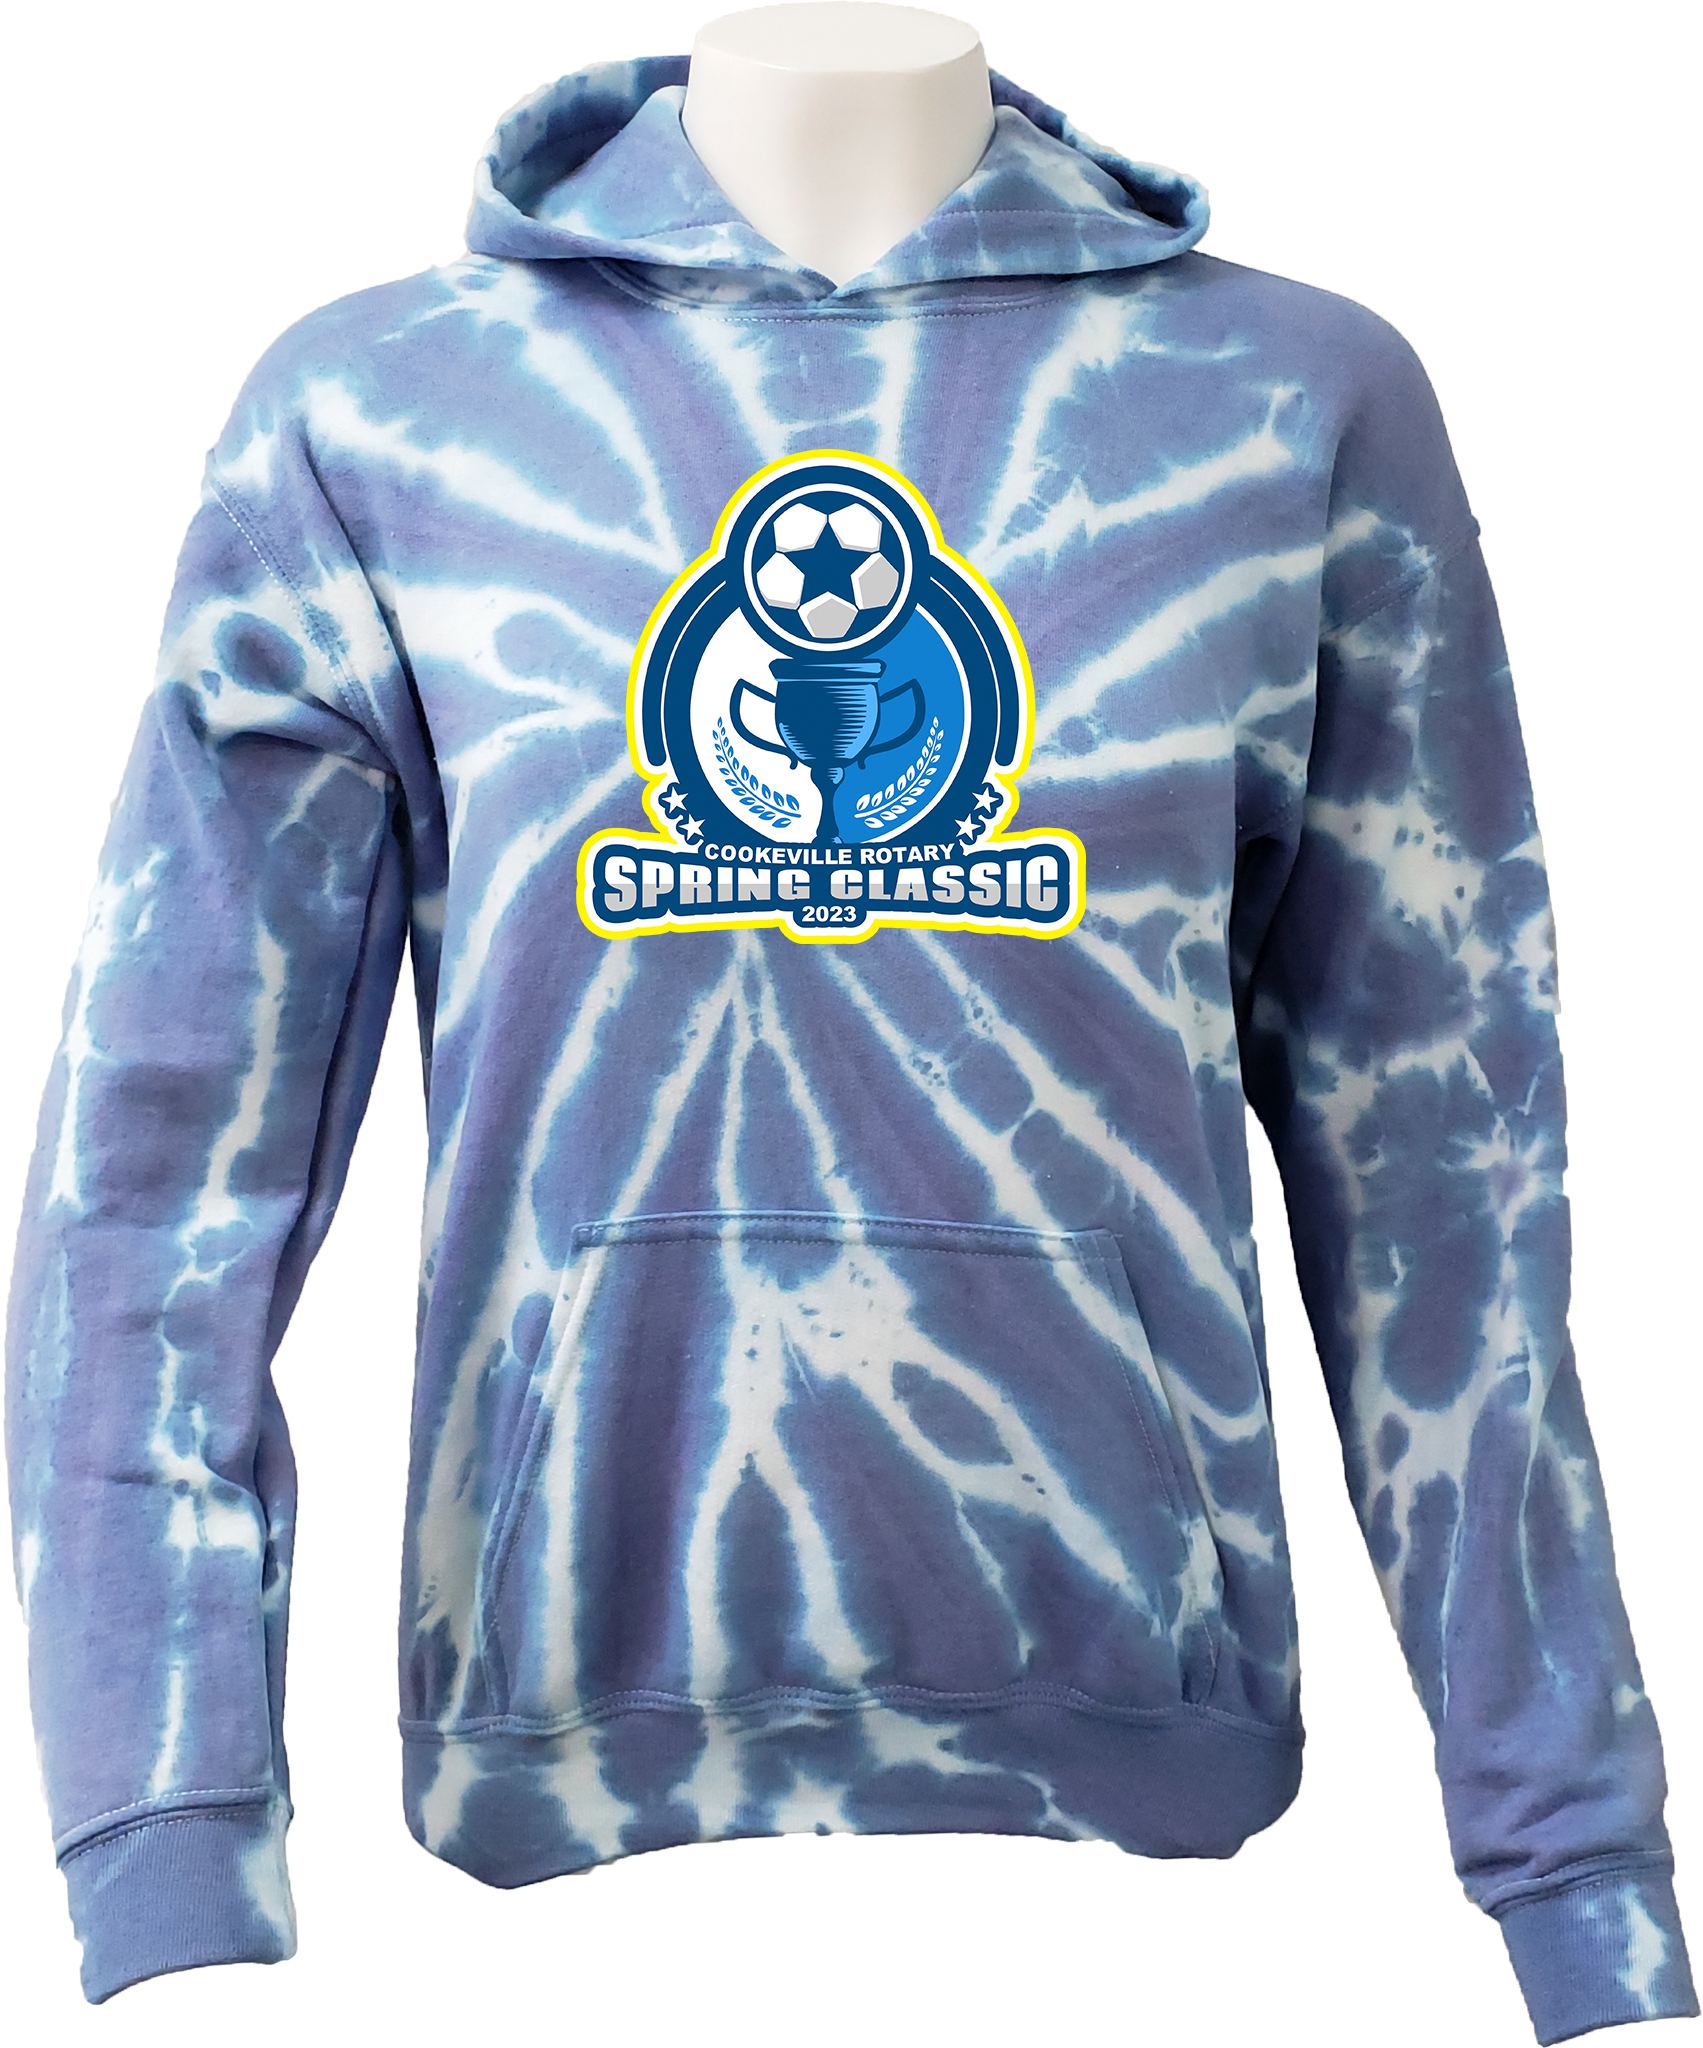 TIE-DYE HOODIES - 2023 Cookesville Rotary Soccer Classic